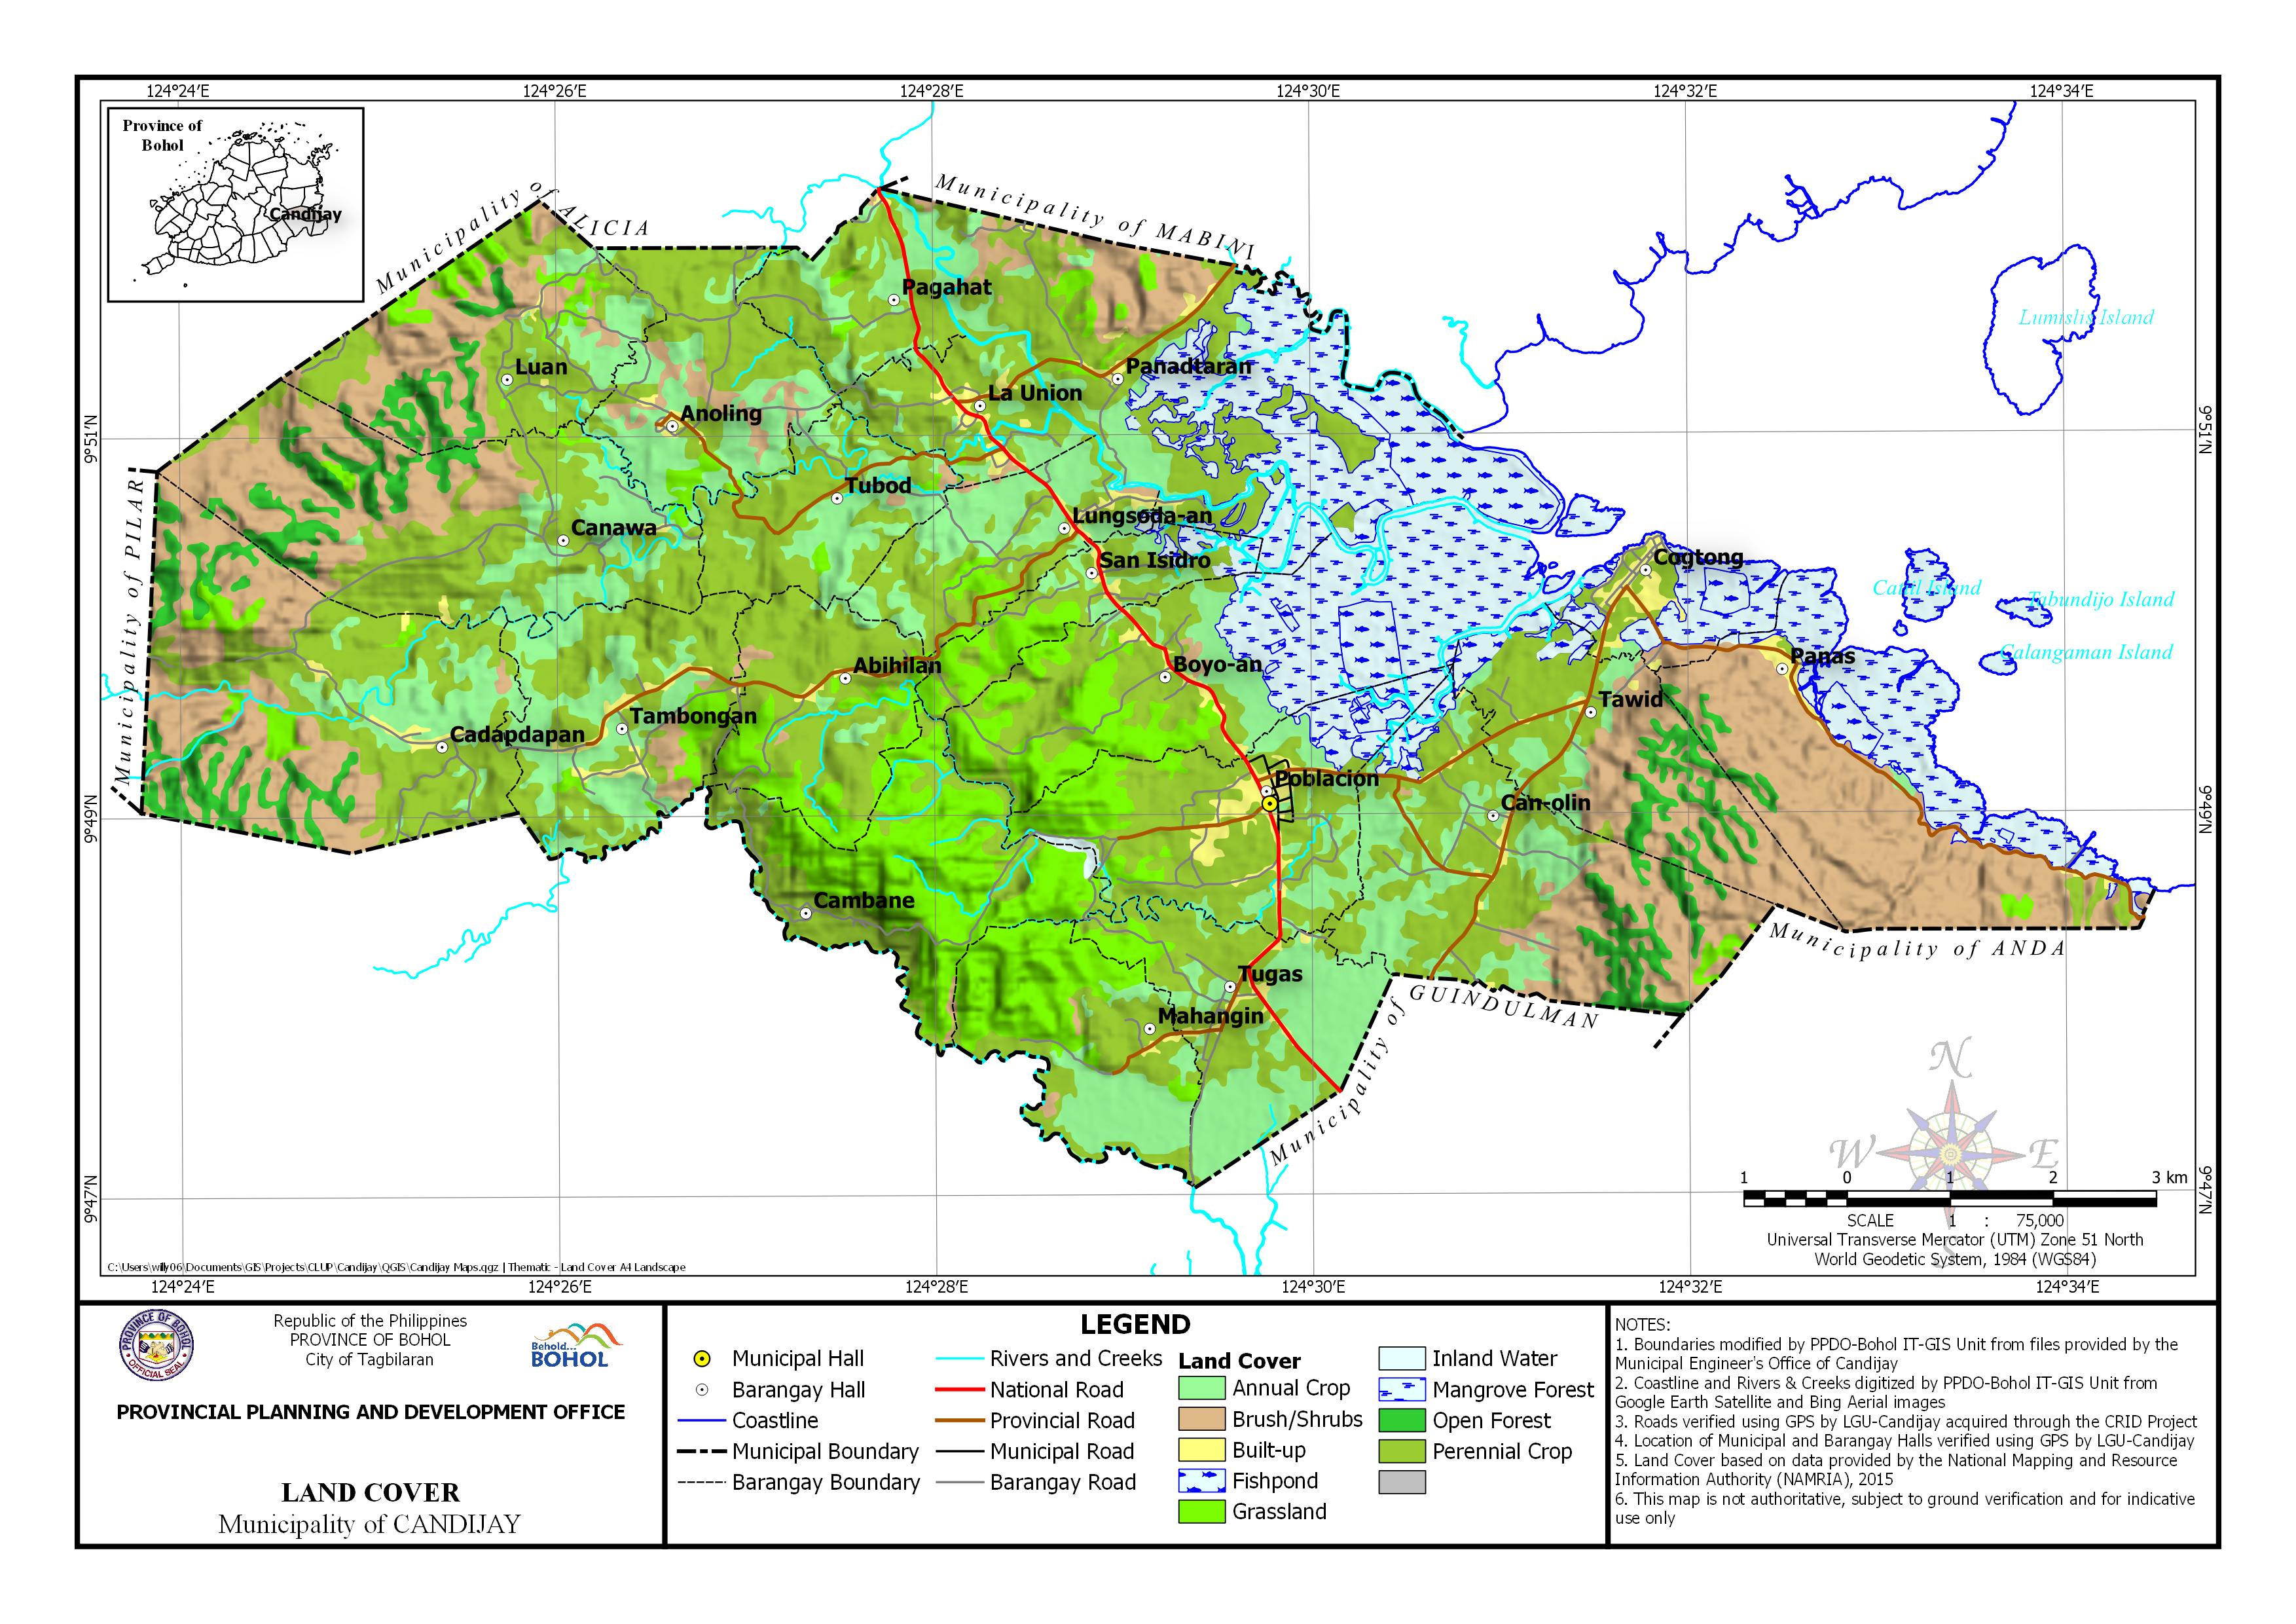 Land Cover Map